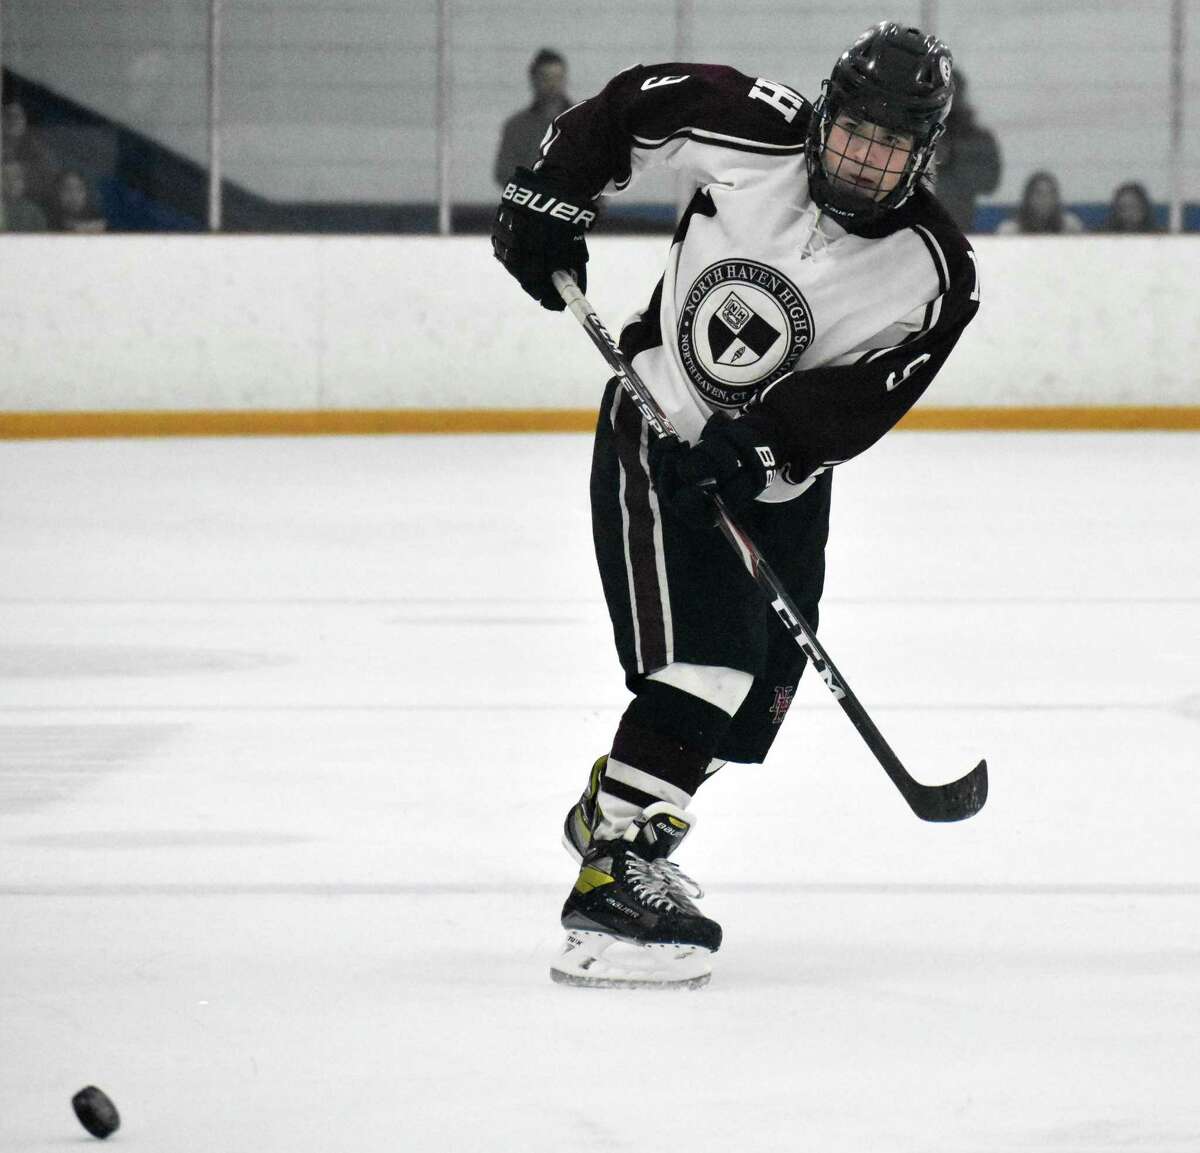 North Haven's Justin Pniewski makes a pass during the CIAC Division II boys hockey semifinals on Tuesday.